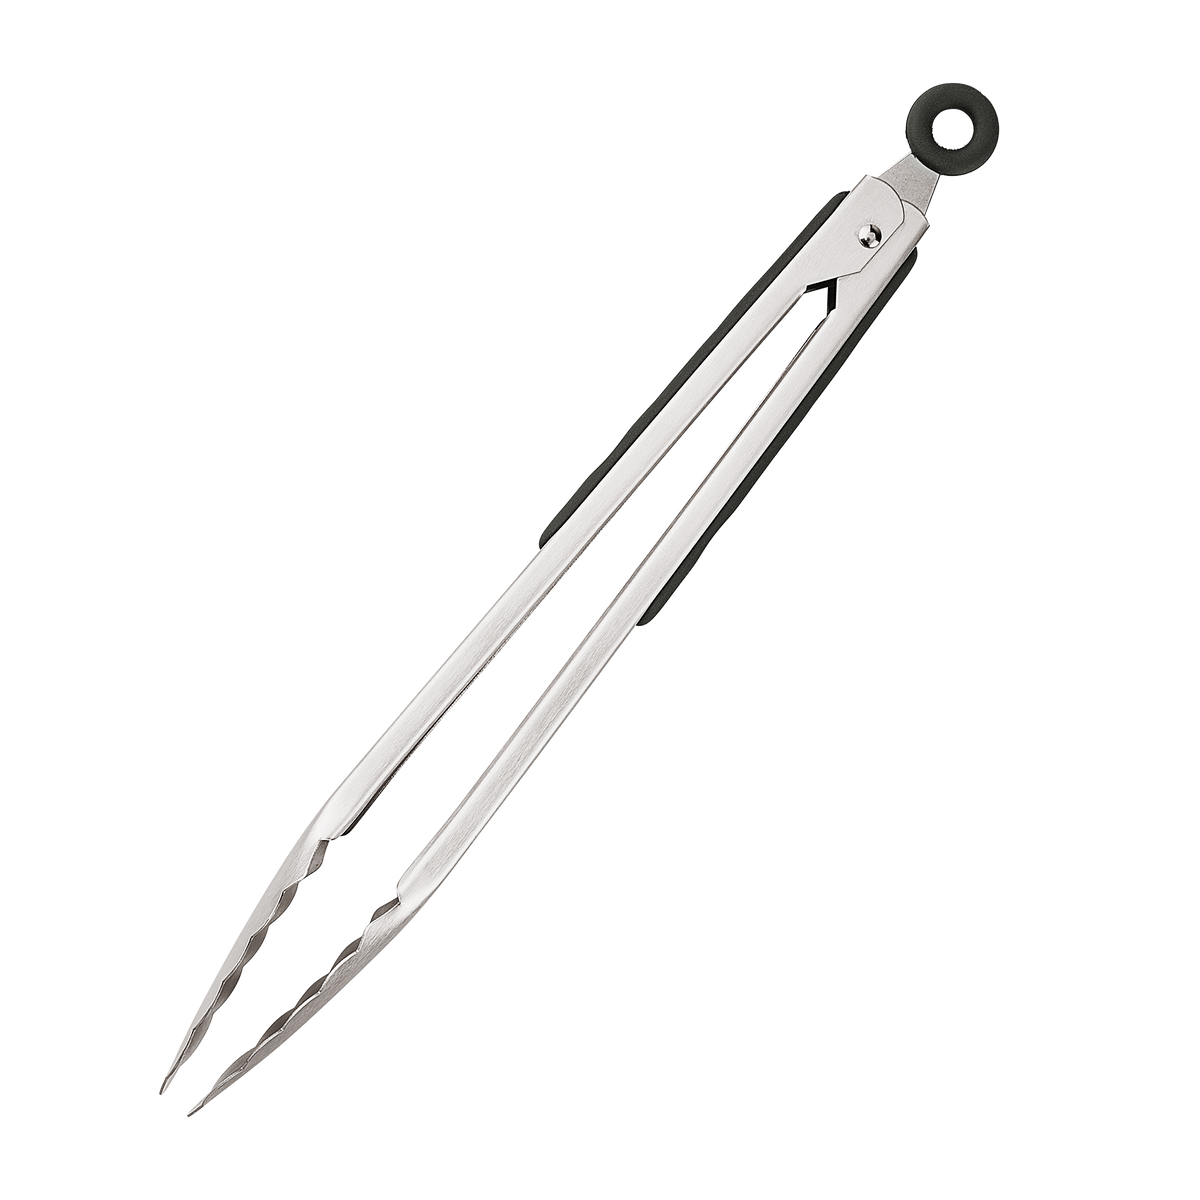 Product photo, side view, 12 inch stainless steel tongs, in closed and locked position..